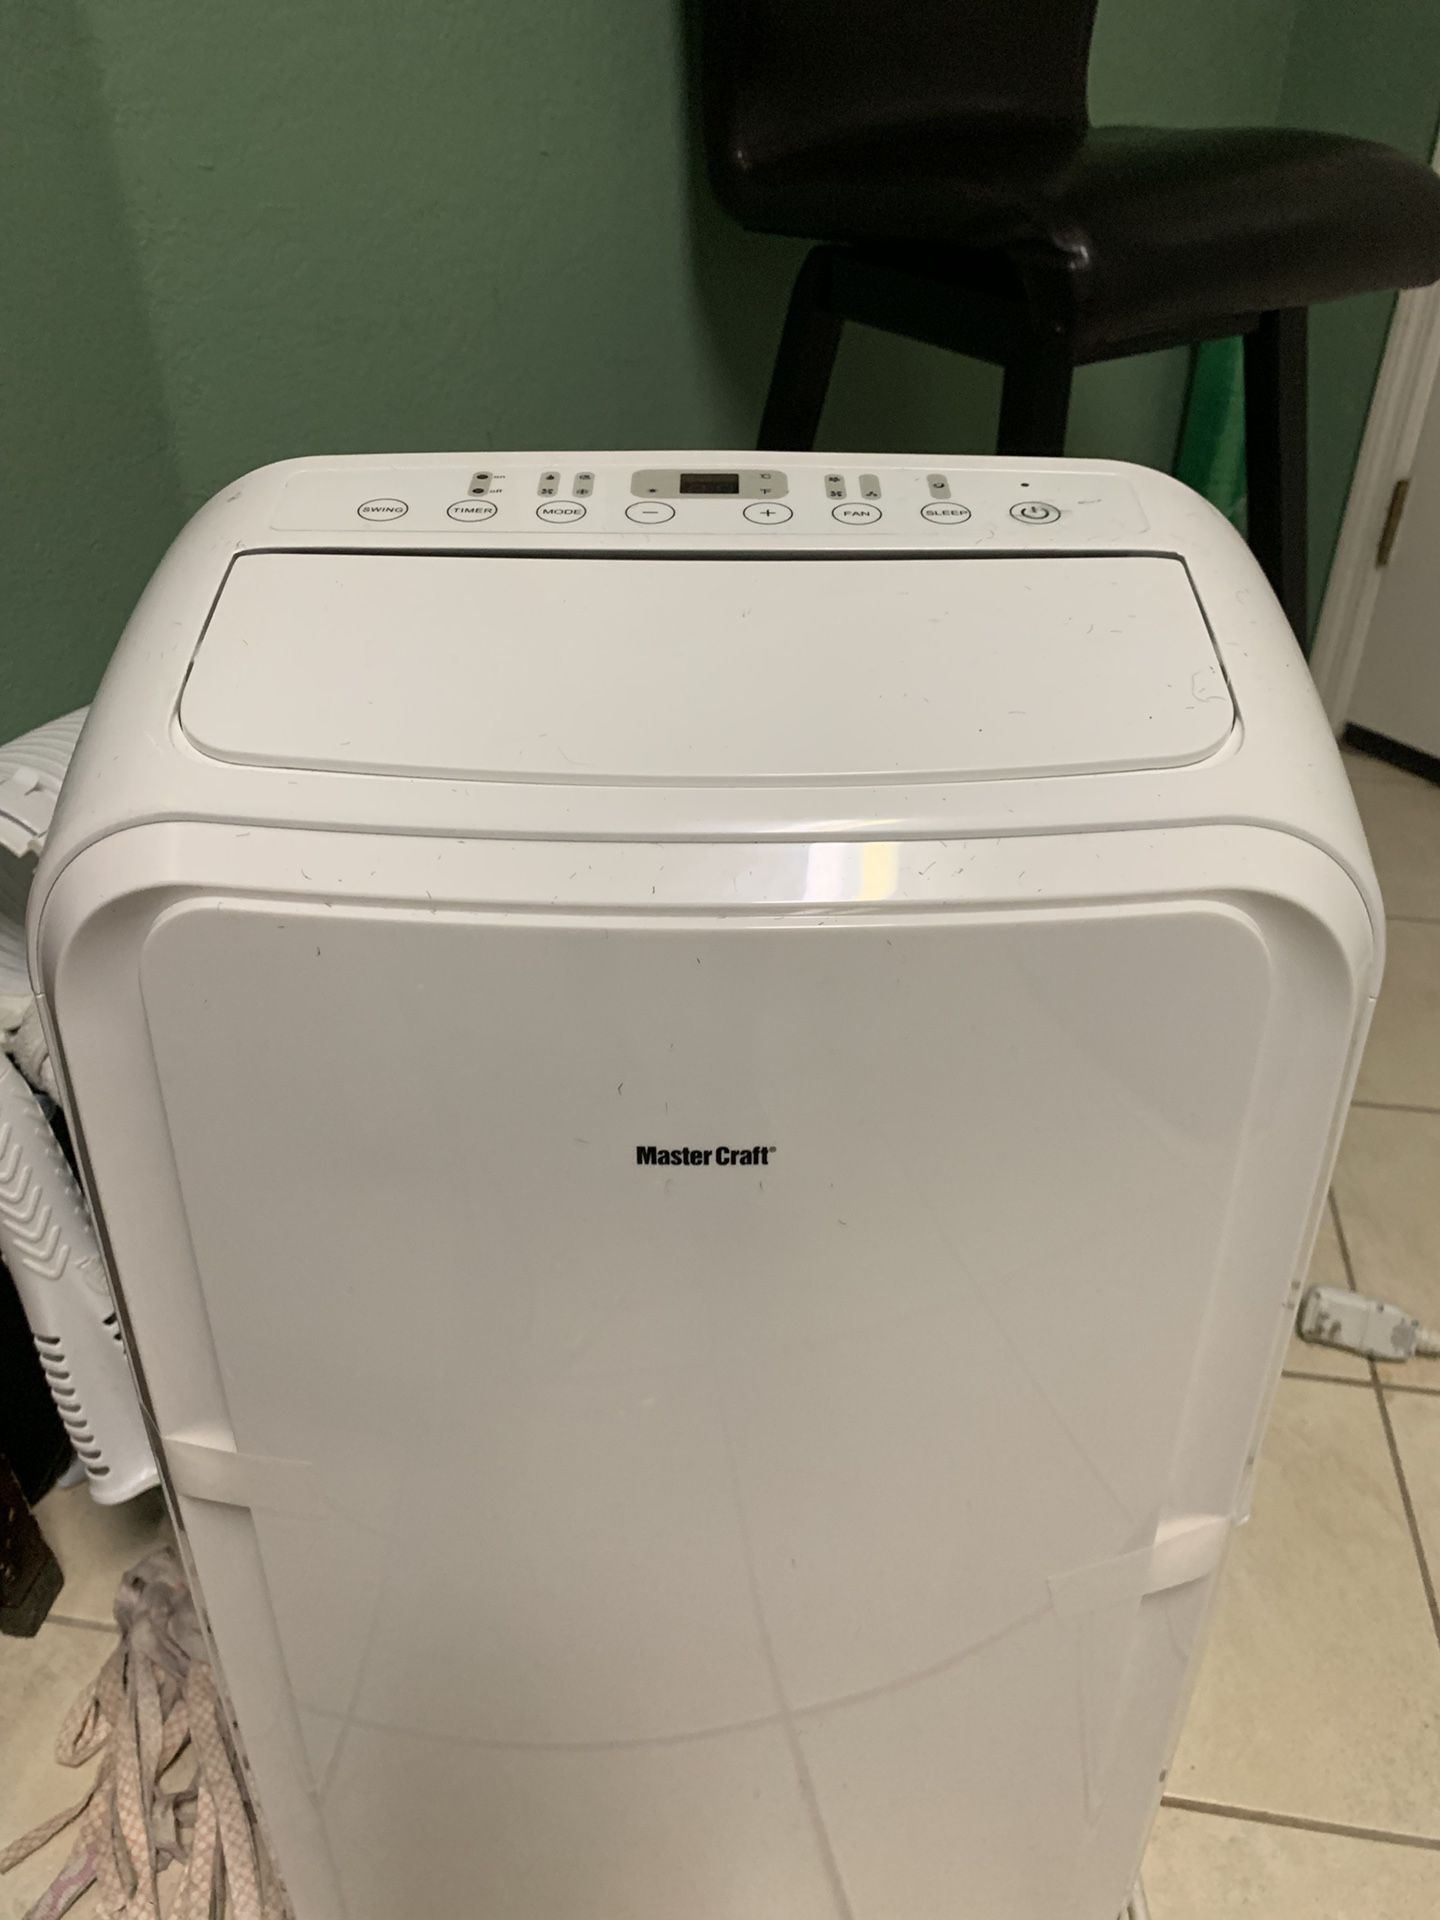 Master Craft Portable AC and heater 12000 BTU lightly used for sale in excellent condition